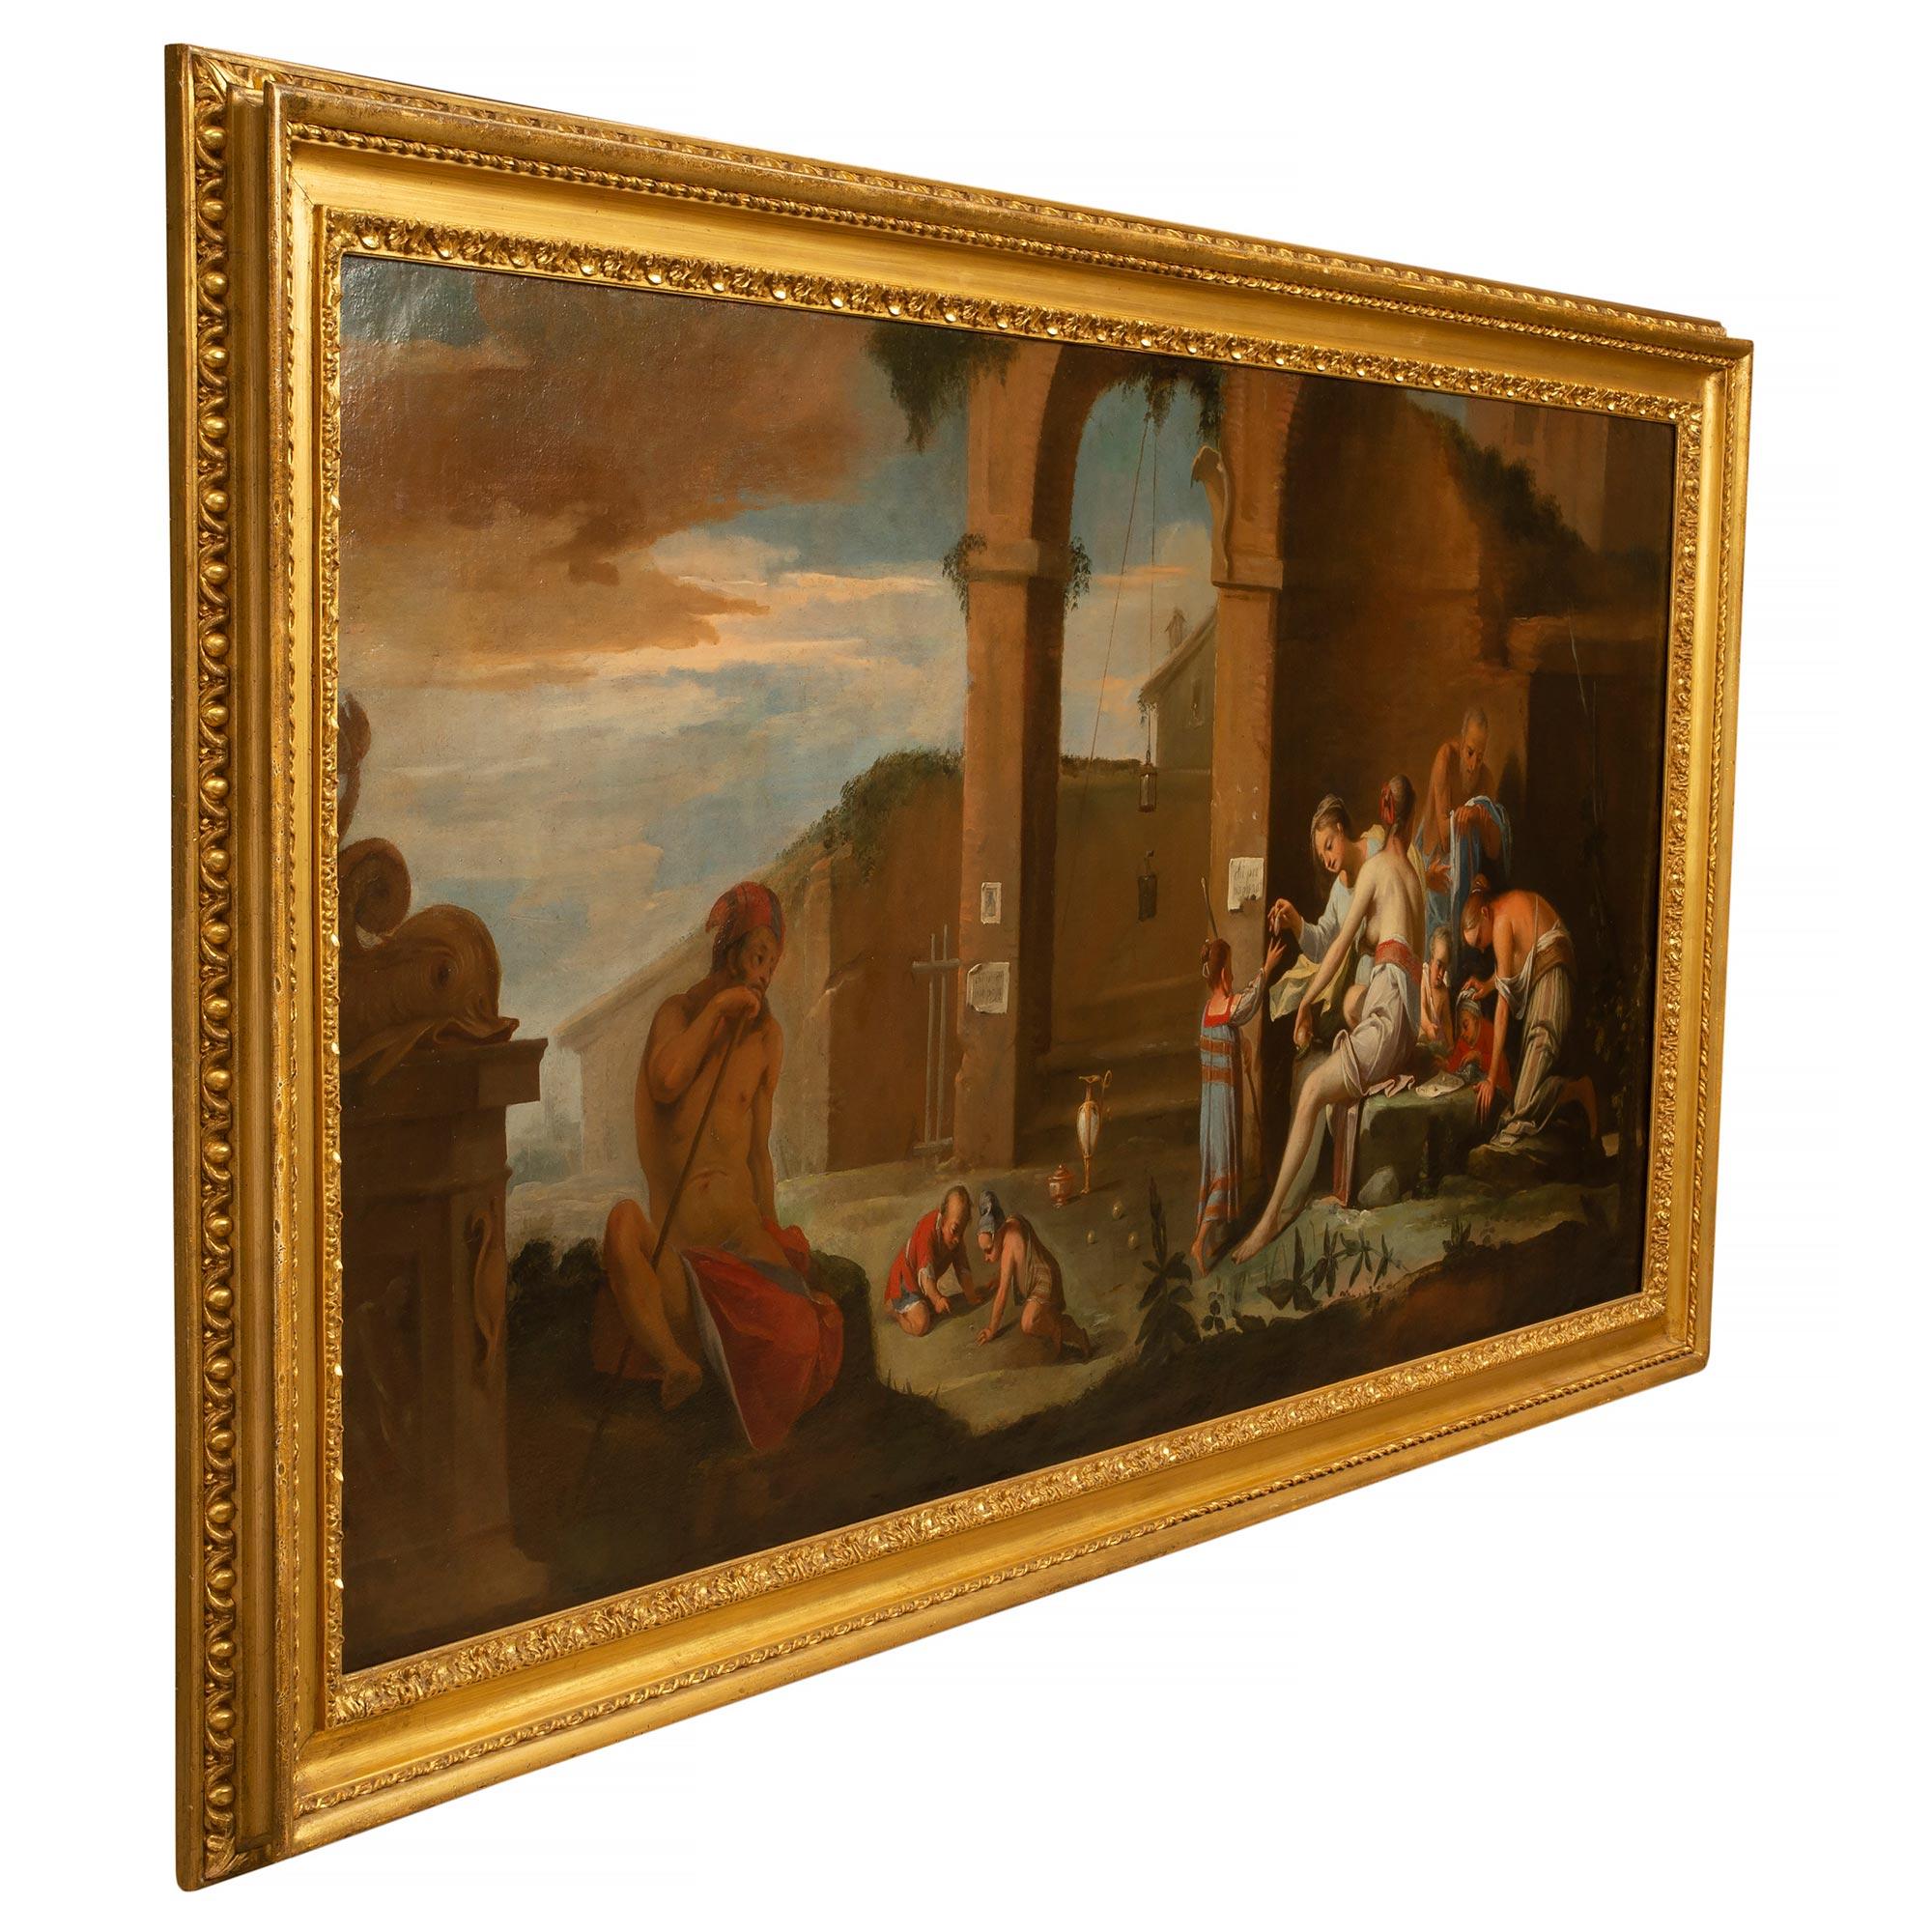 A stunning pair of Italian 17th century oil on canvas paintings by Antonio Travi. Each painting displays an impressive array of rich colors, typical of Travi's works. One painting depicts an elder man leaning on a cane and a group of women teaching